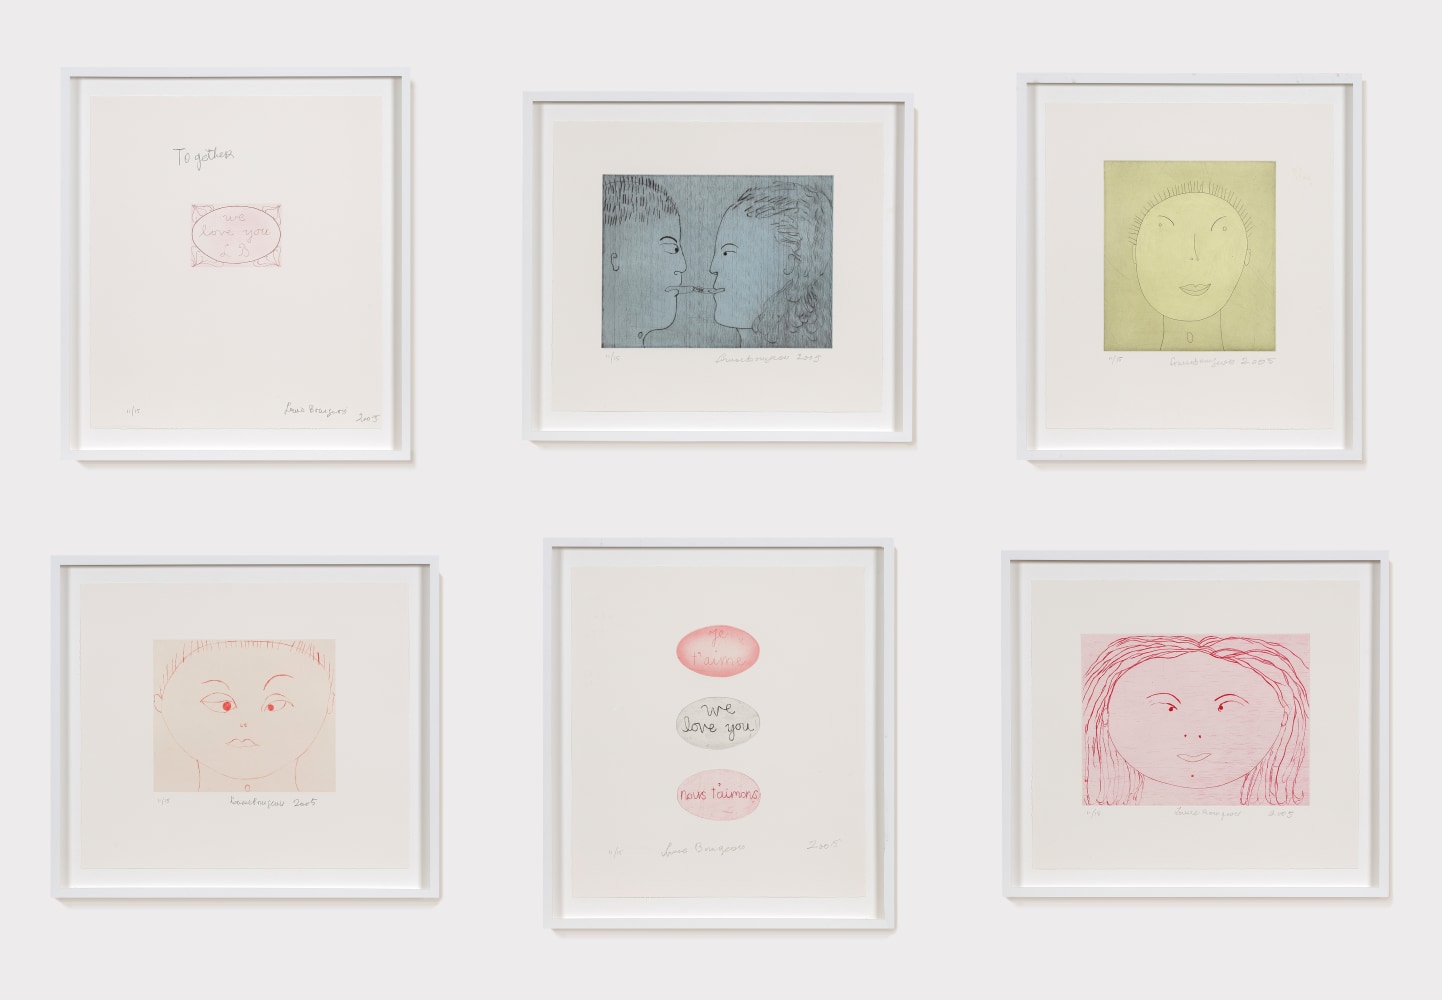 A portfolio of six framed drypoints and engravings ranging in color by Louise Bourgeois